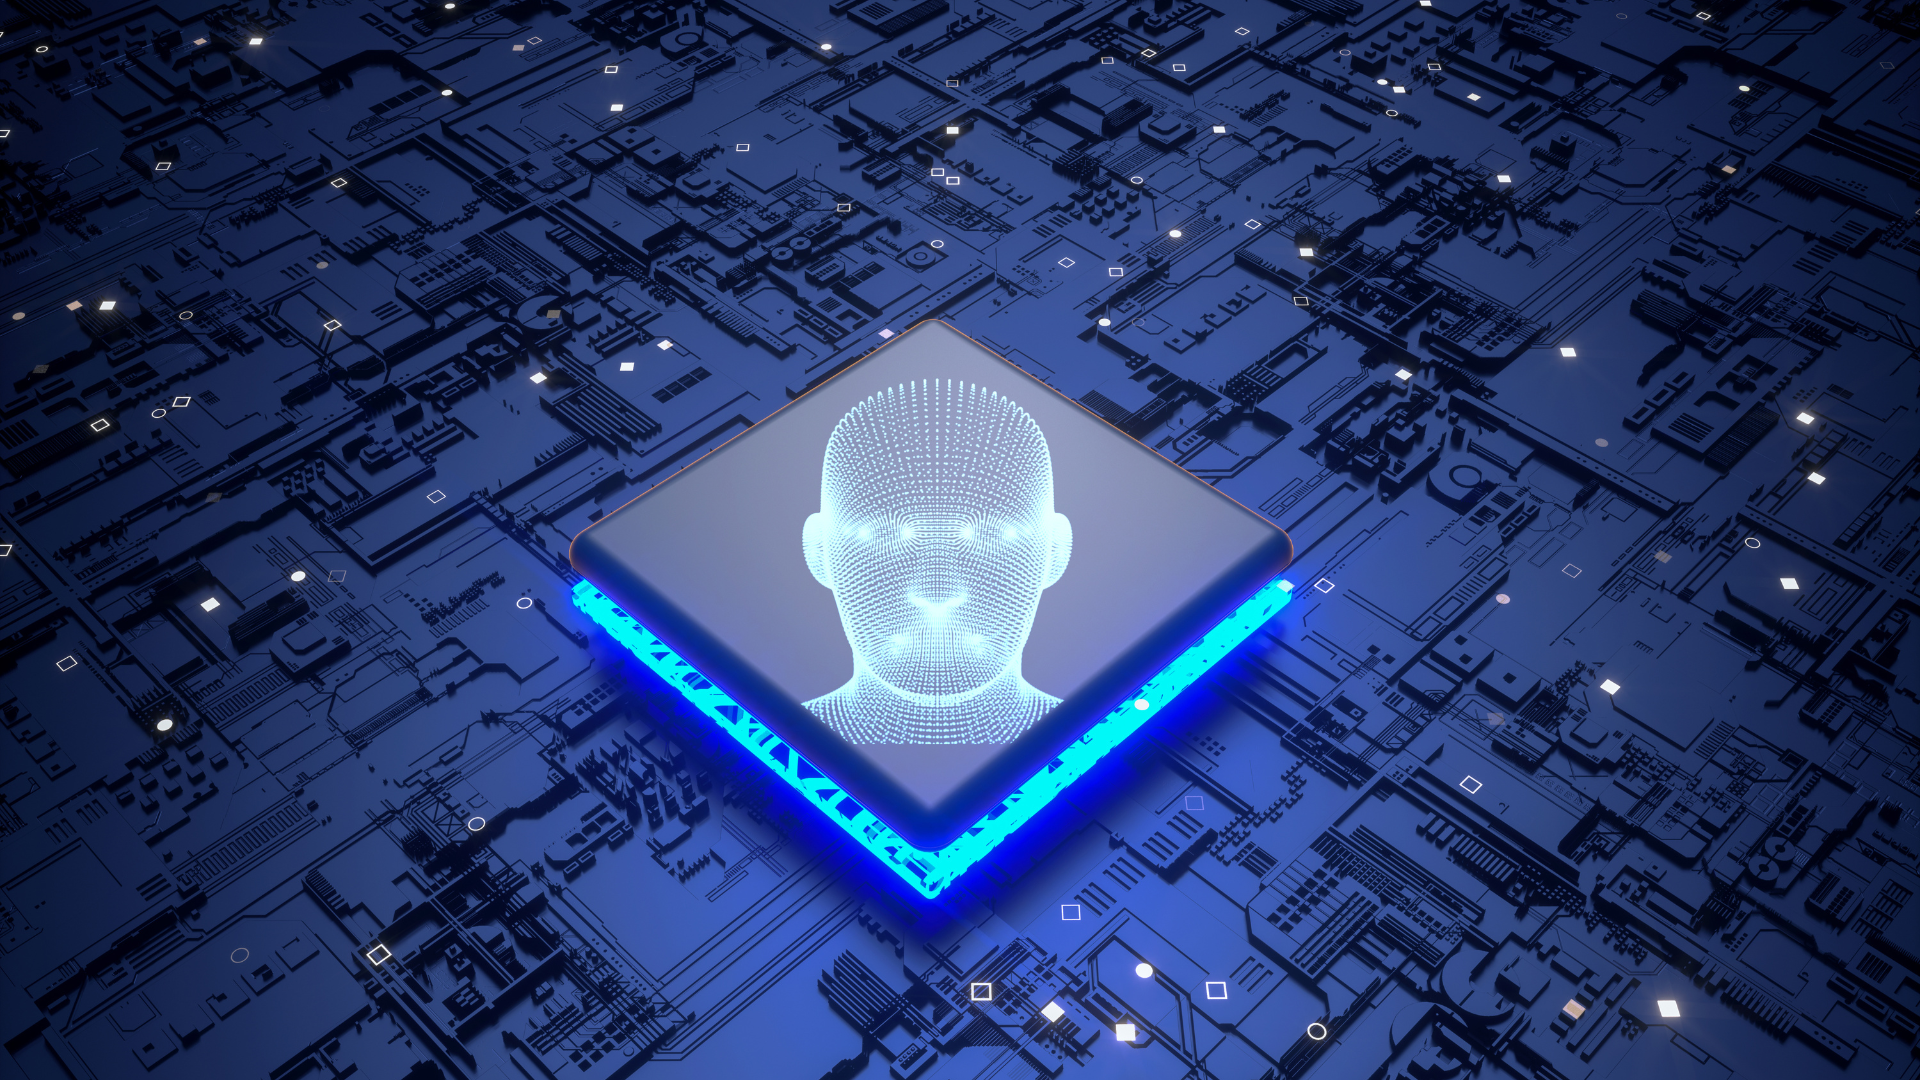 A dark blue circuit board, with a raised CPU. The CPU has an image of a digital head on it, symbolising Artificial Intelligence